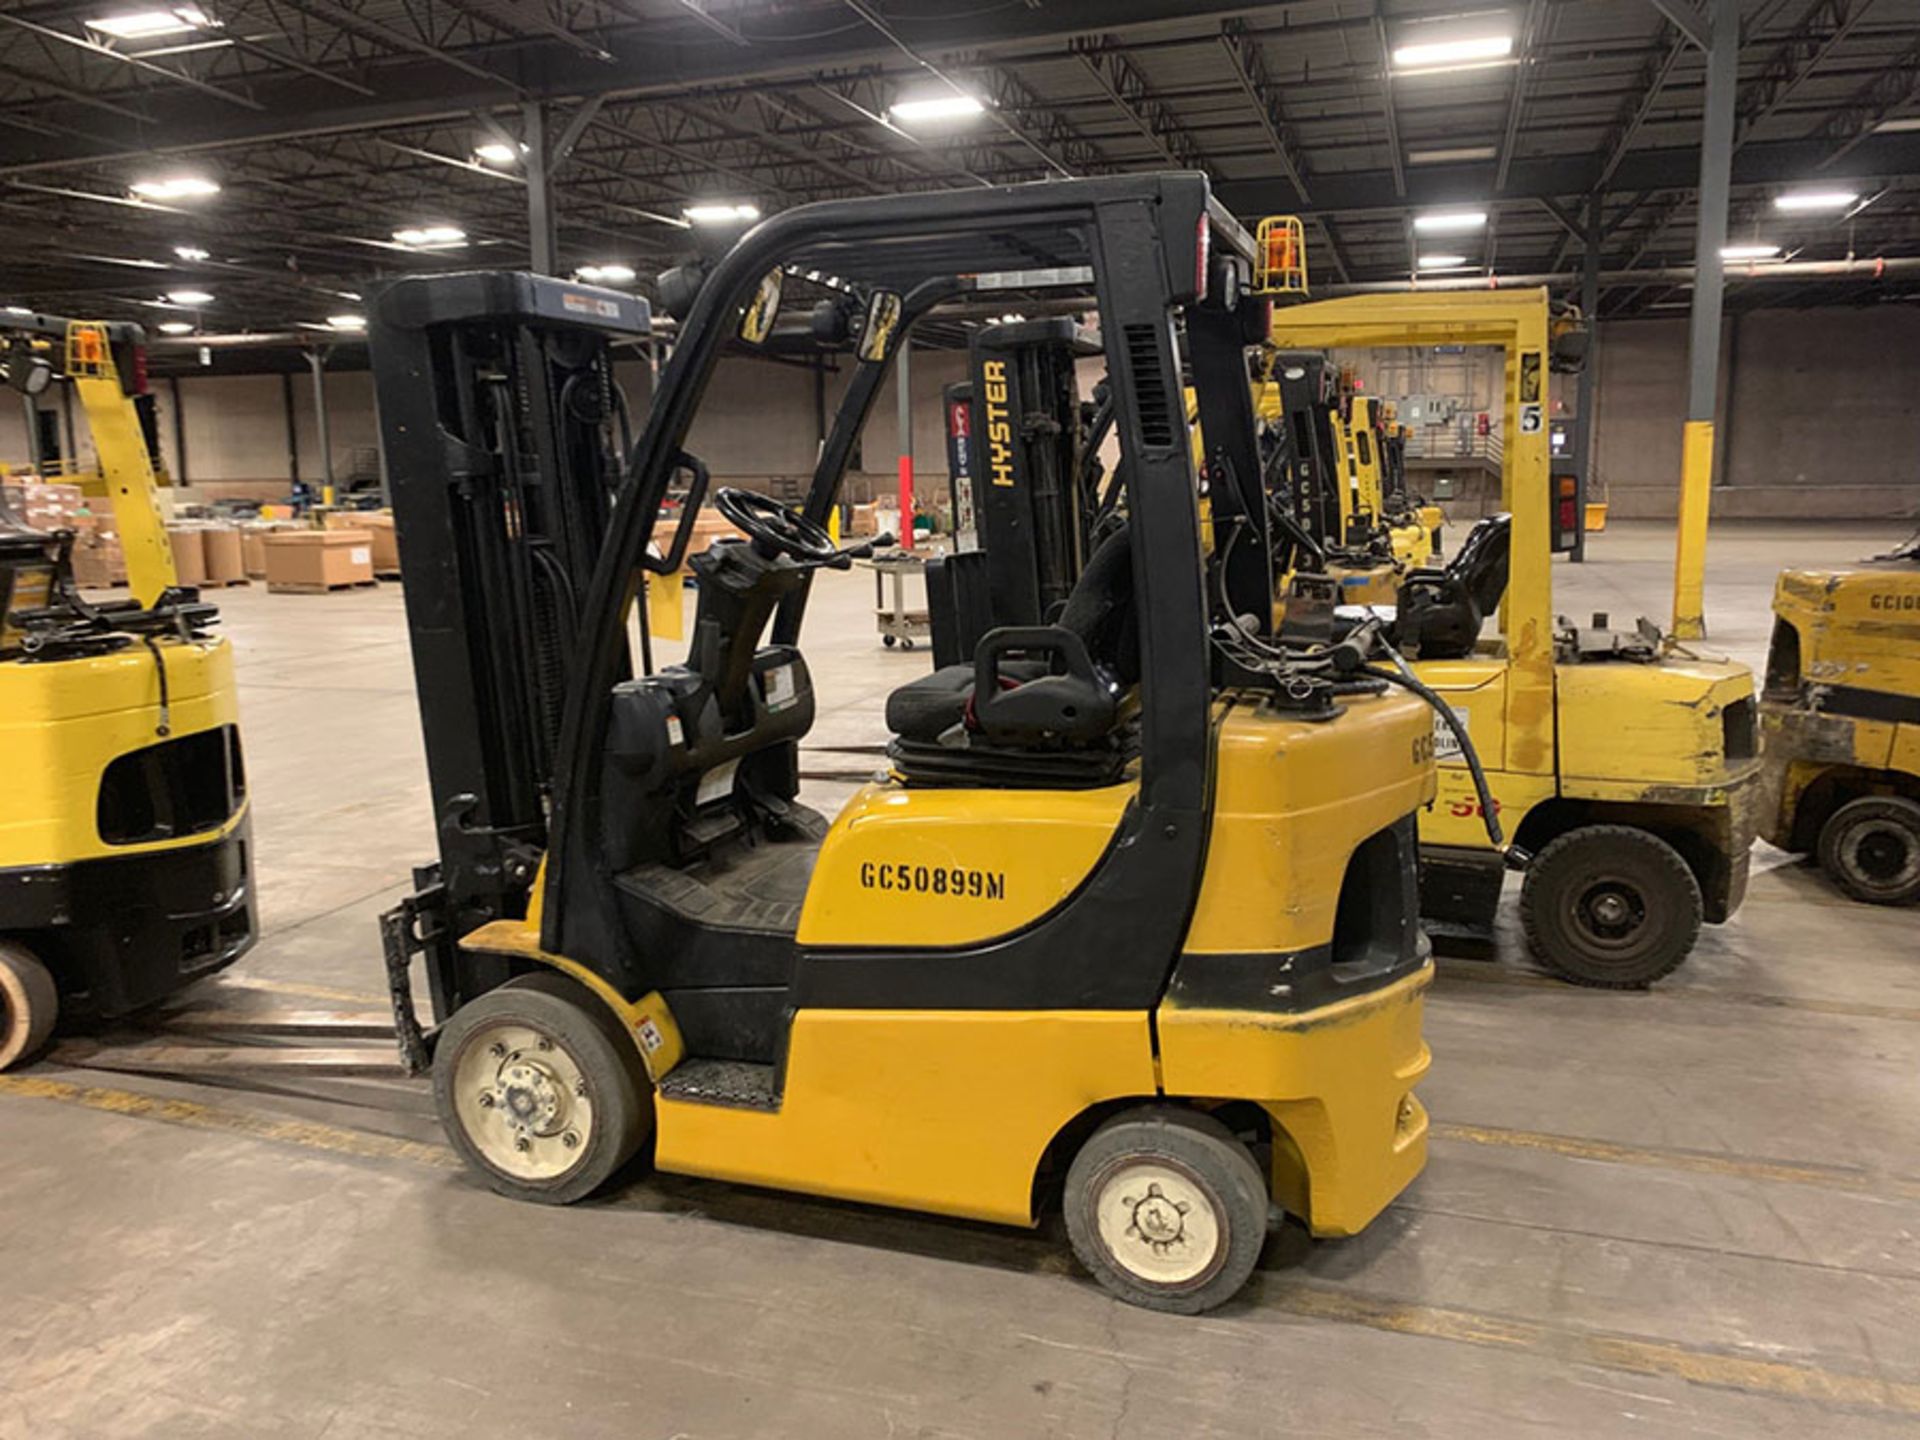 2014 YALE 5,000 LB. CAPACITY FORKLIFT; LPG, CUSHION TIRES, 3-STAGE MAST, 189'' LIFT HEIGHT, SIDE